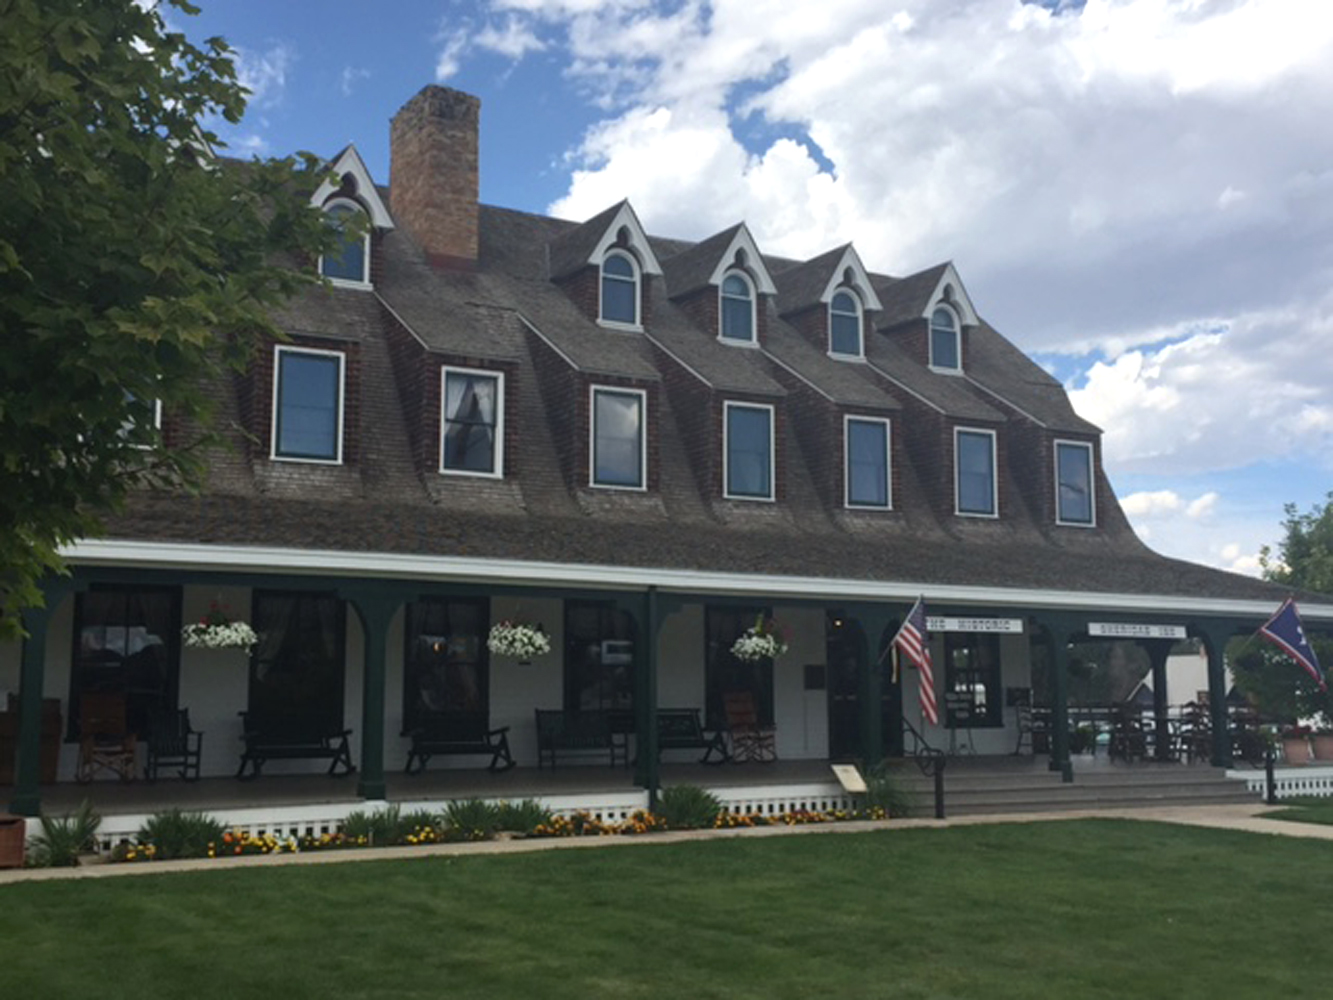 Ernest Hemingway finished his novel “A Farewell to Arms” while staying at the historic Sheridan Inn, which will serve as home base for the August writing workshop.